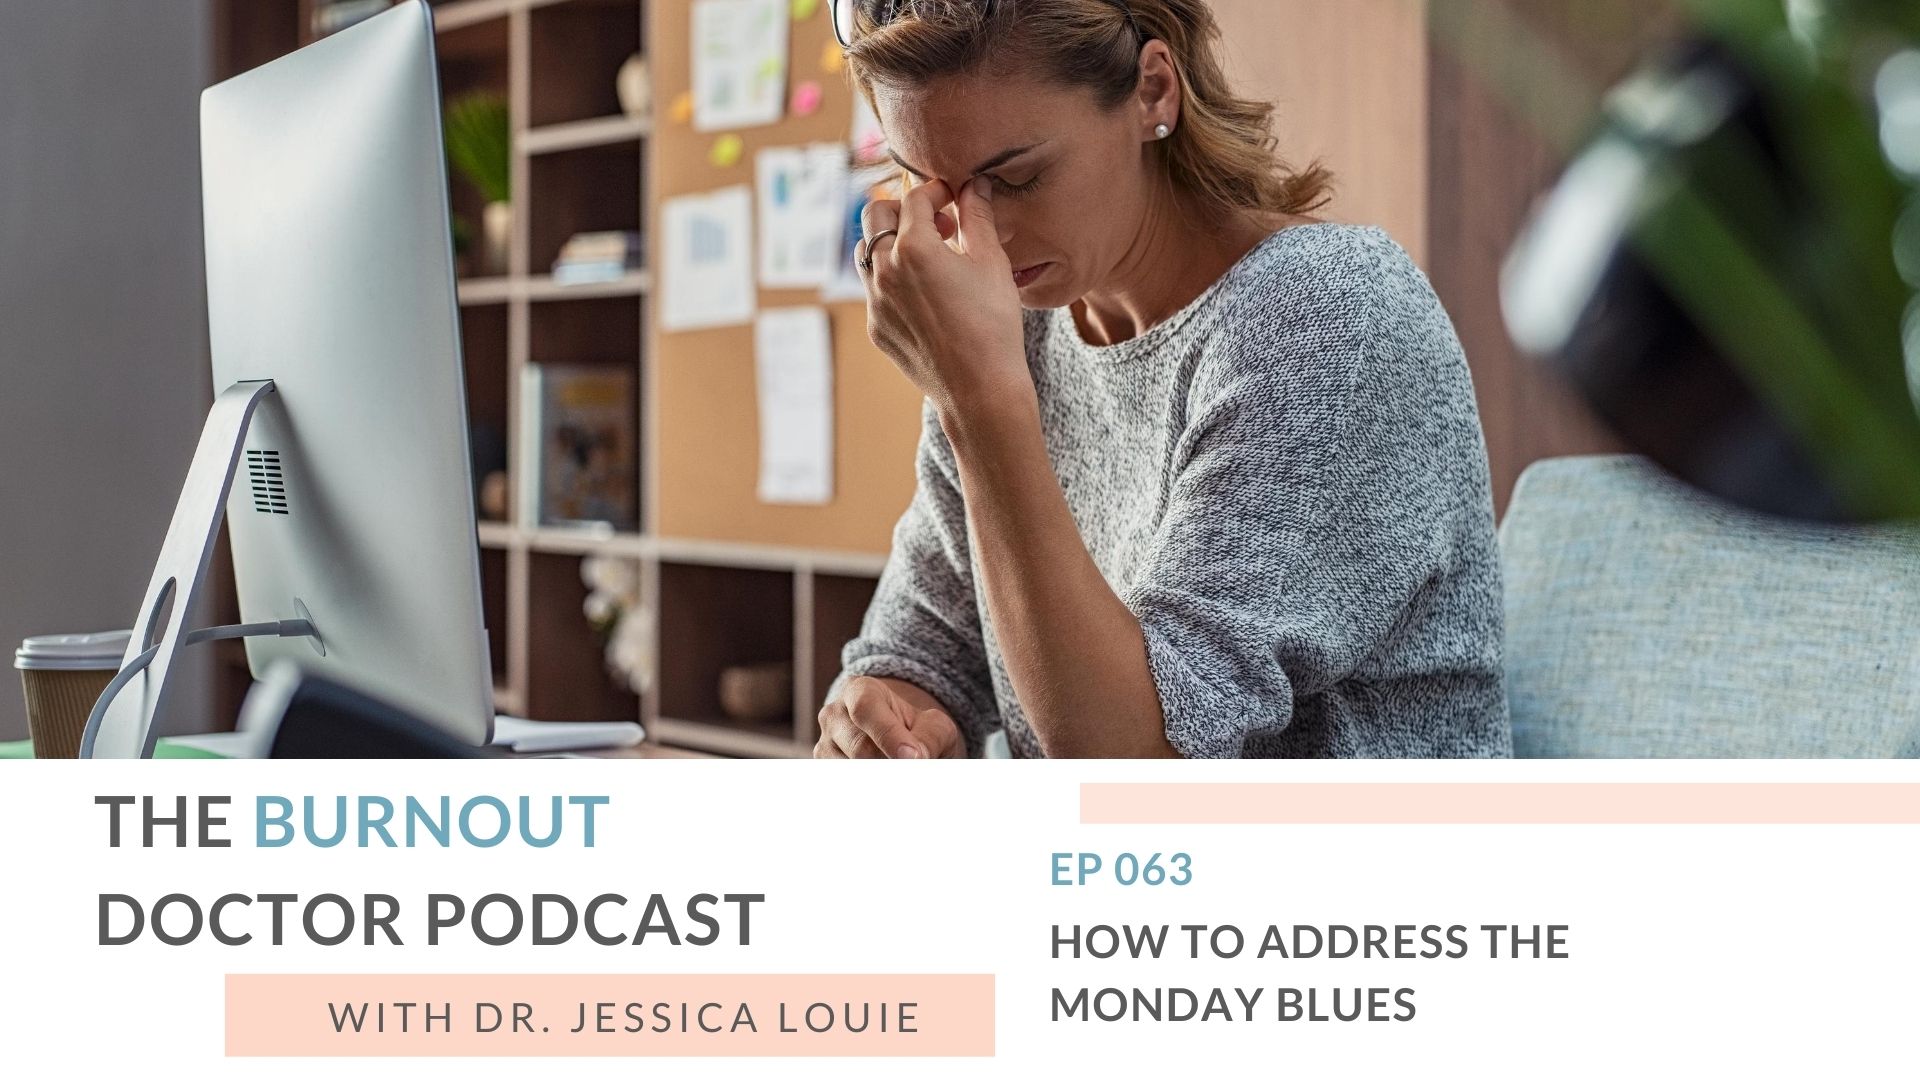 4 Steps to Addressing the Monday Blues, Dreading Monday mornings because of burnout and stress, Pharmacist burnout coaching, The Burnout Doctor Podcast by Dr. Jessica Louie and Clarify Simplify Align Method. Stop healthcare burnout. simplifying life for healthcare families.